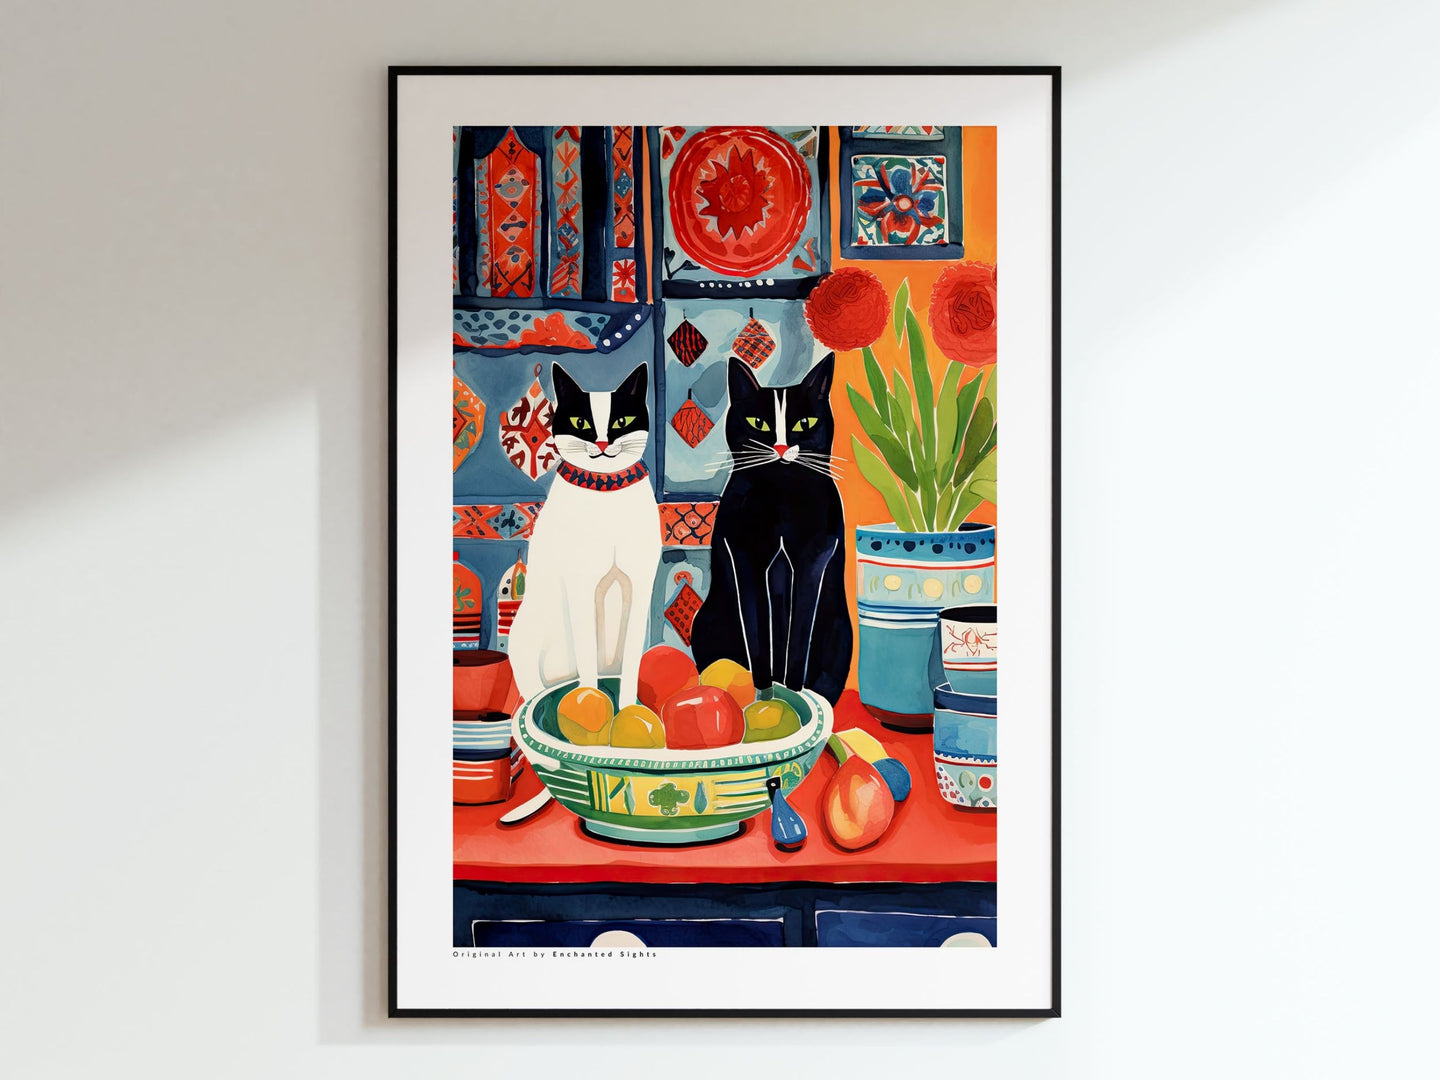 Black and White Cat Poster, Trendy Cat Wall Art, Home Decor Print, Red and Blue Art, Cat Lover Gift, Watercolor Cat Illustration